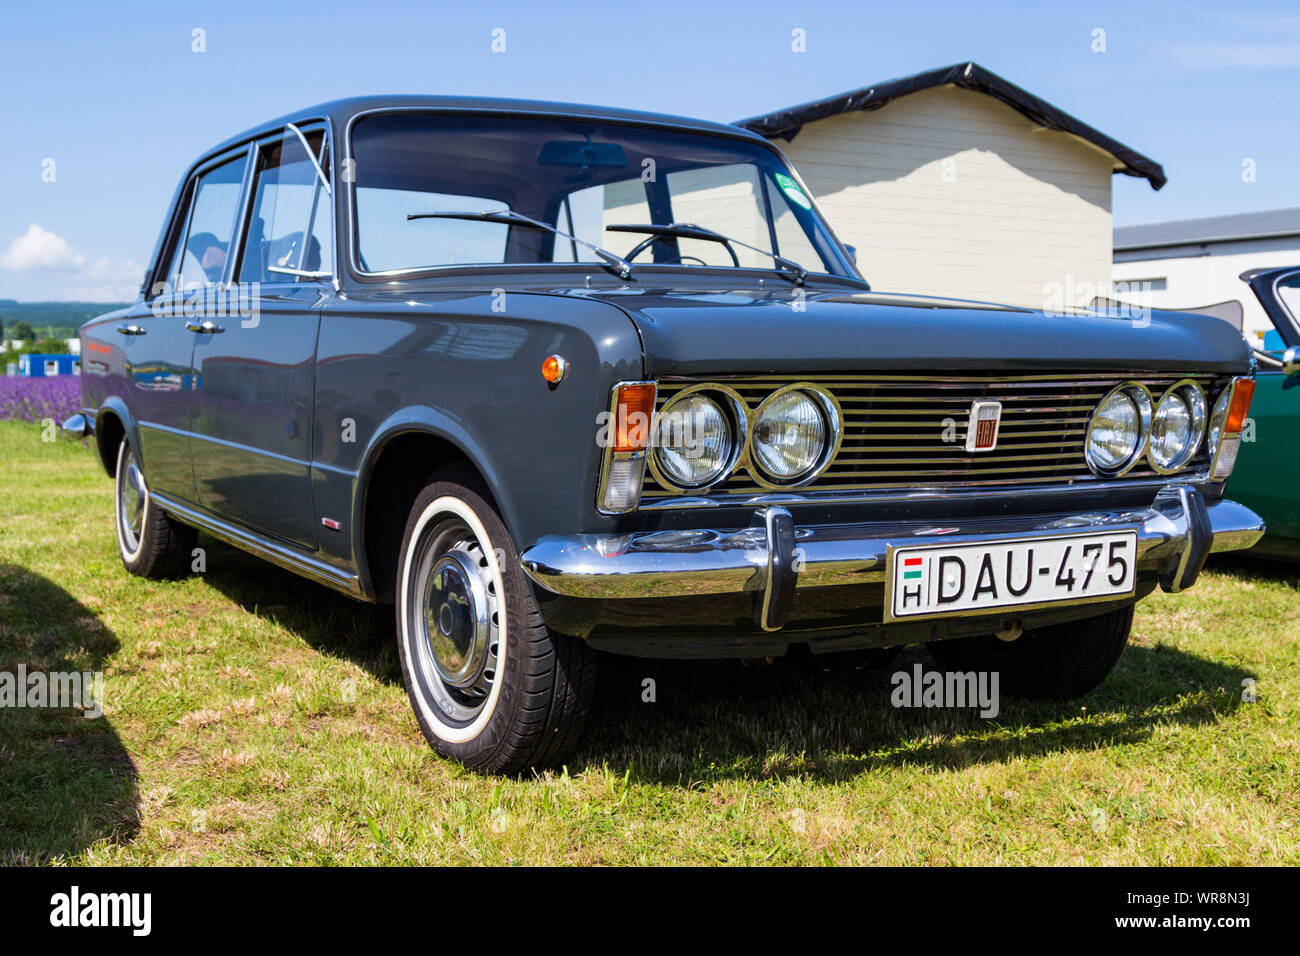 Polski Fiat 125p High Resolution Stock Photography and Images - Alamy